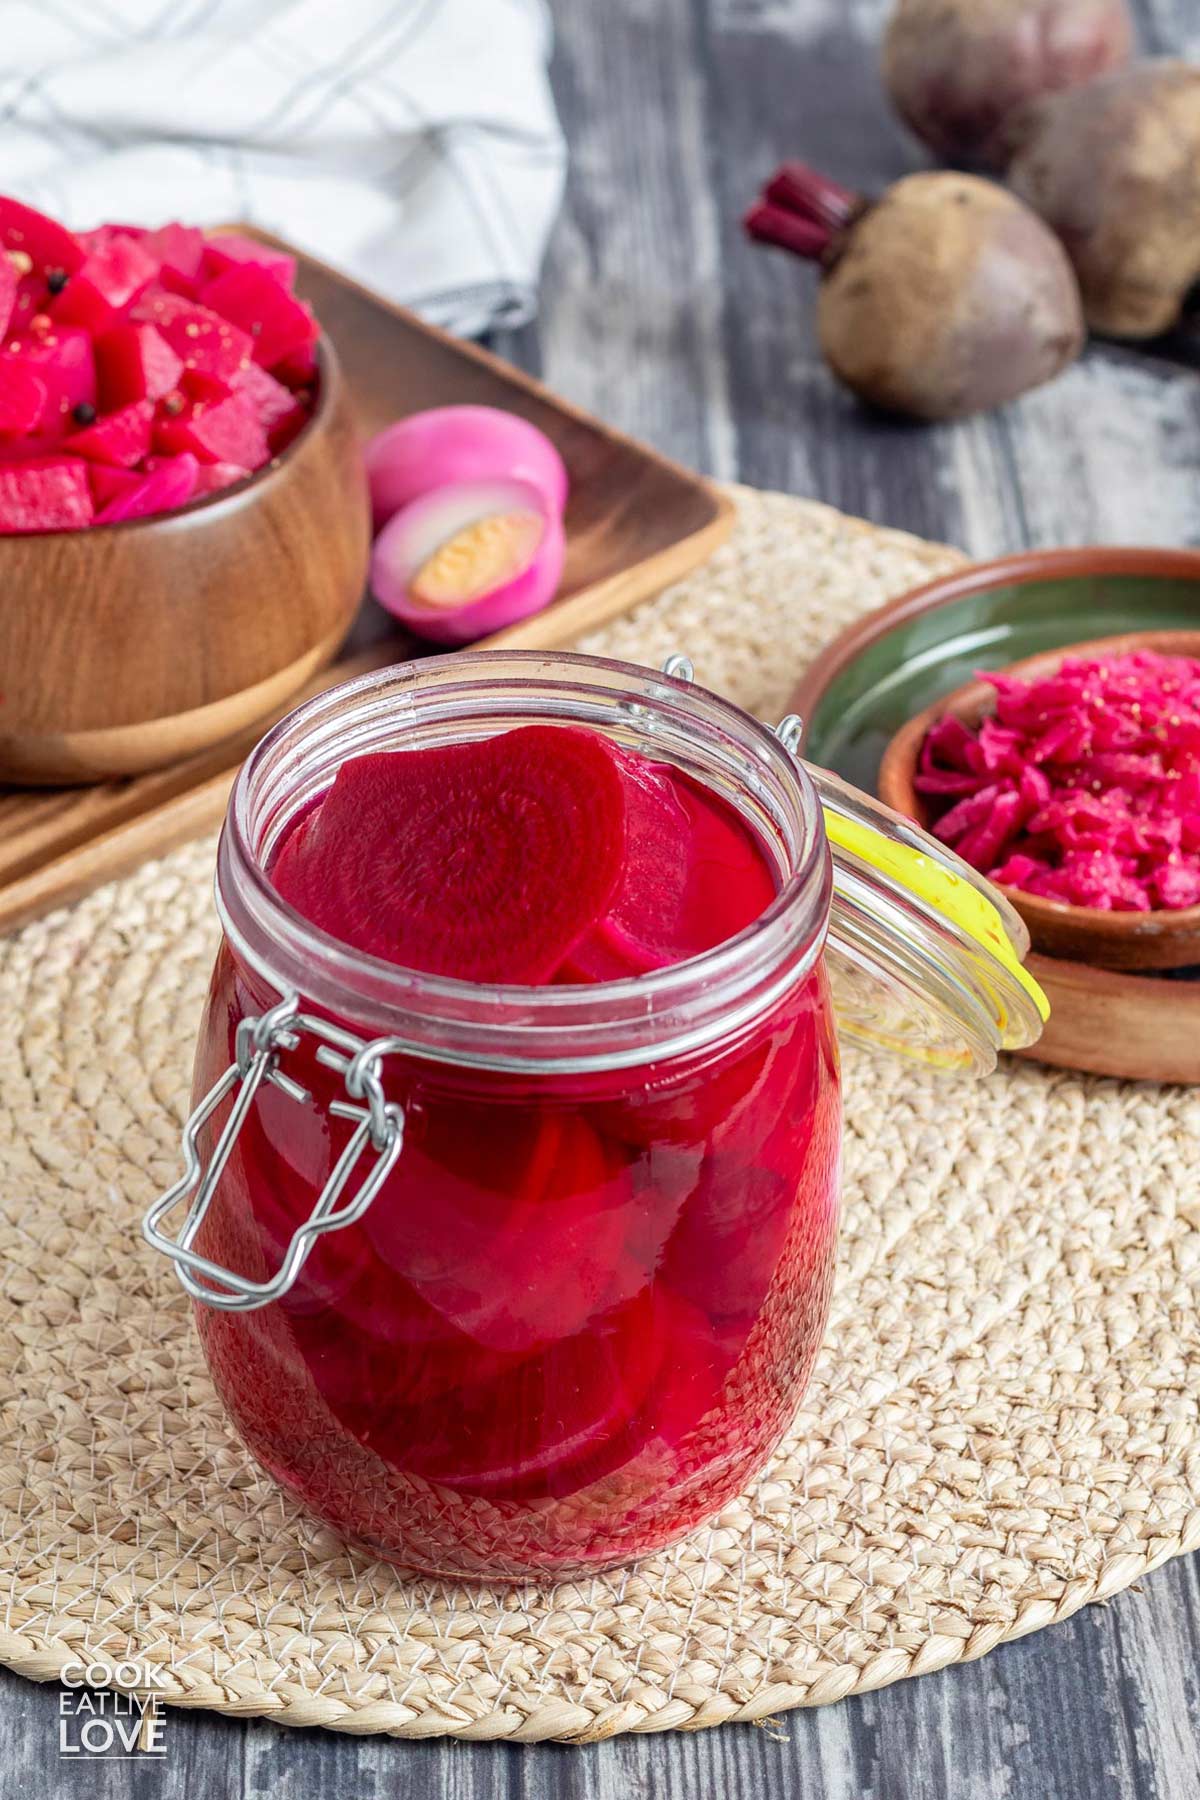 A jar of quick pickled beets without sugar on the table with the hinge lid open and sliced beets in the jar.